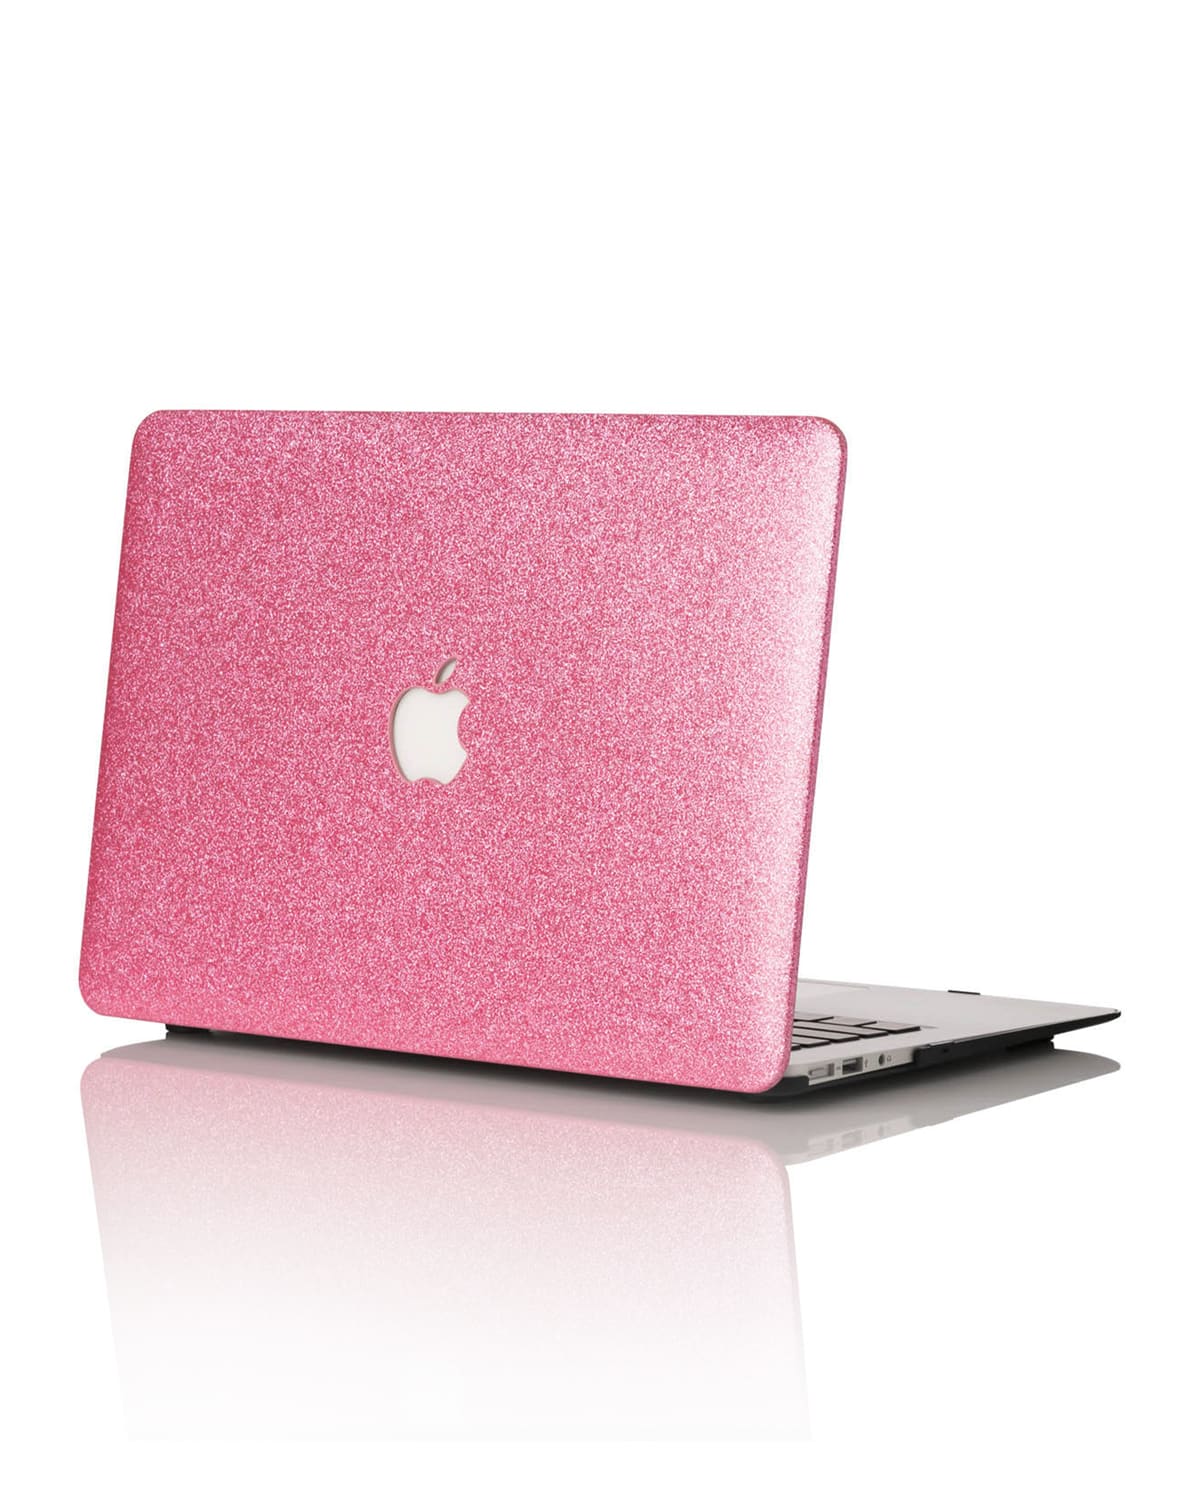 Chic Geeks Glitter 13" Macbook Air Case (model Numbers A1466 & A1369) In Pinkberry